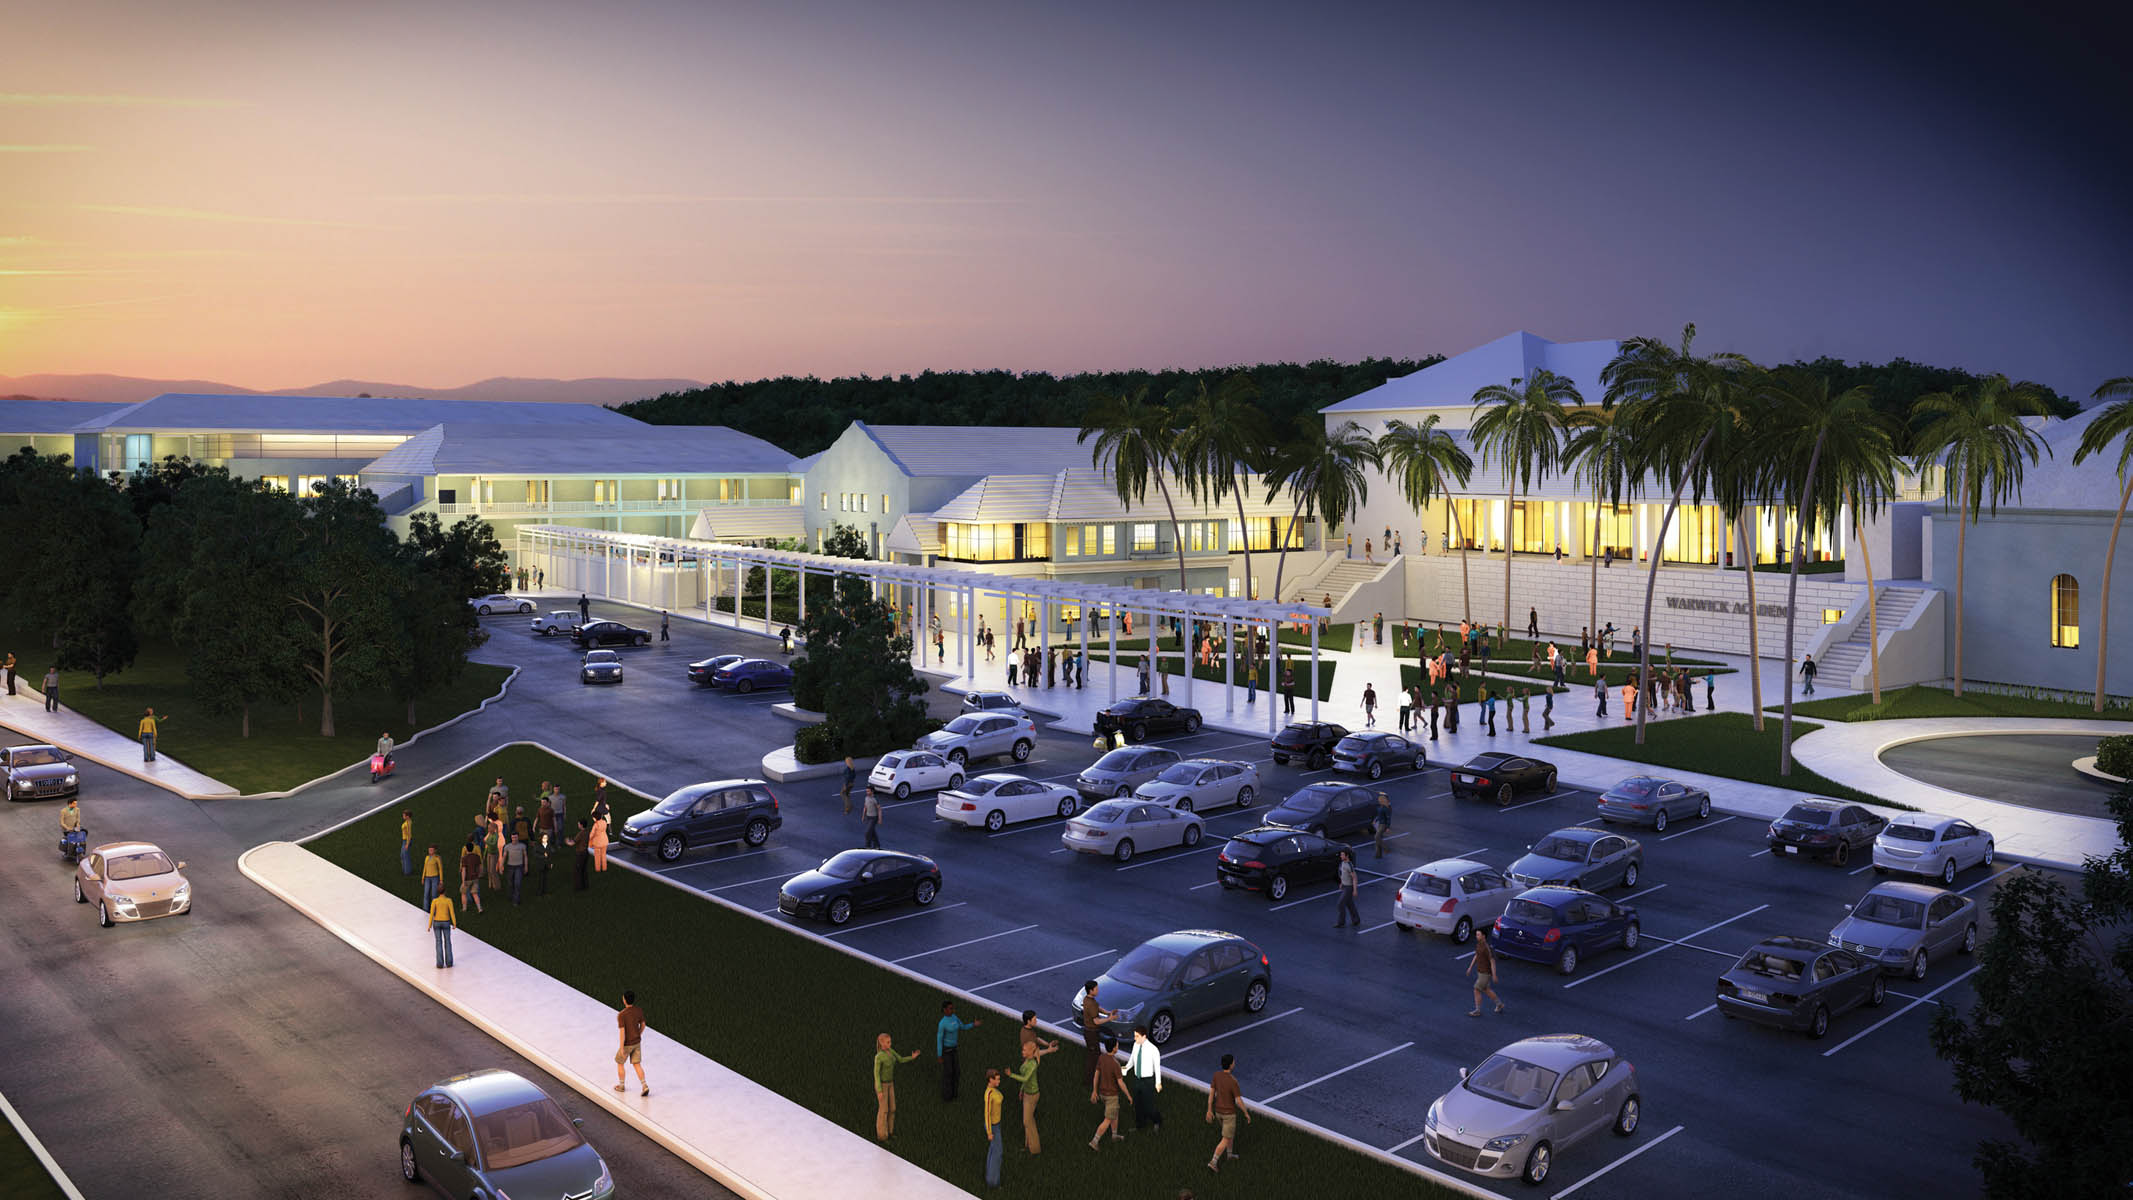 Rendering of illuminated Academy complex with palm trees with parking lot in foreground and mountains in background at dusk